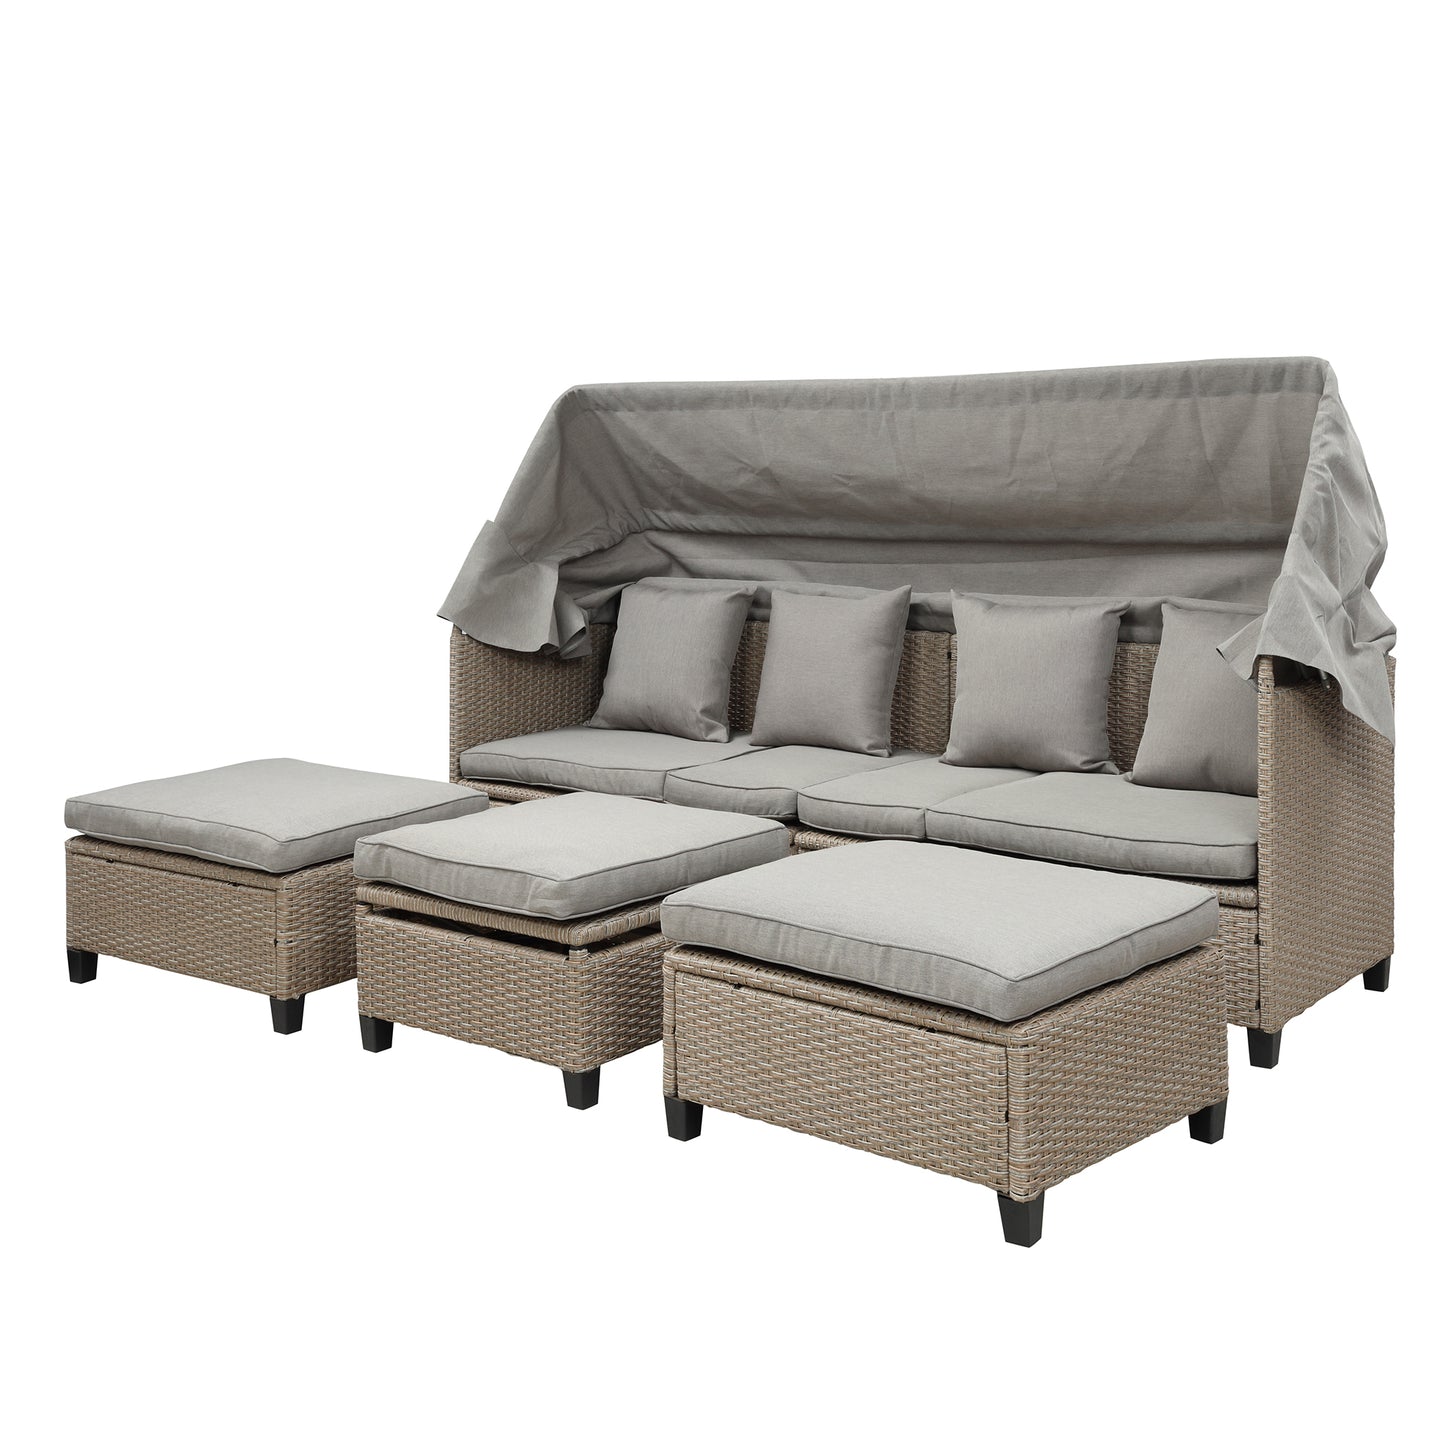 TOPMAX 4 Piece UV-Proof Resin Wicker Patio Sofa Set with Retractable Canopy, Cushions and Lifting Table,Brown